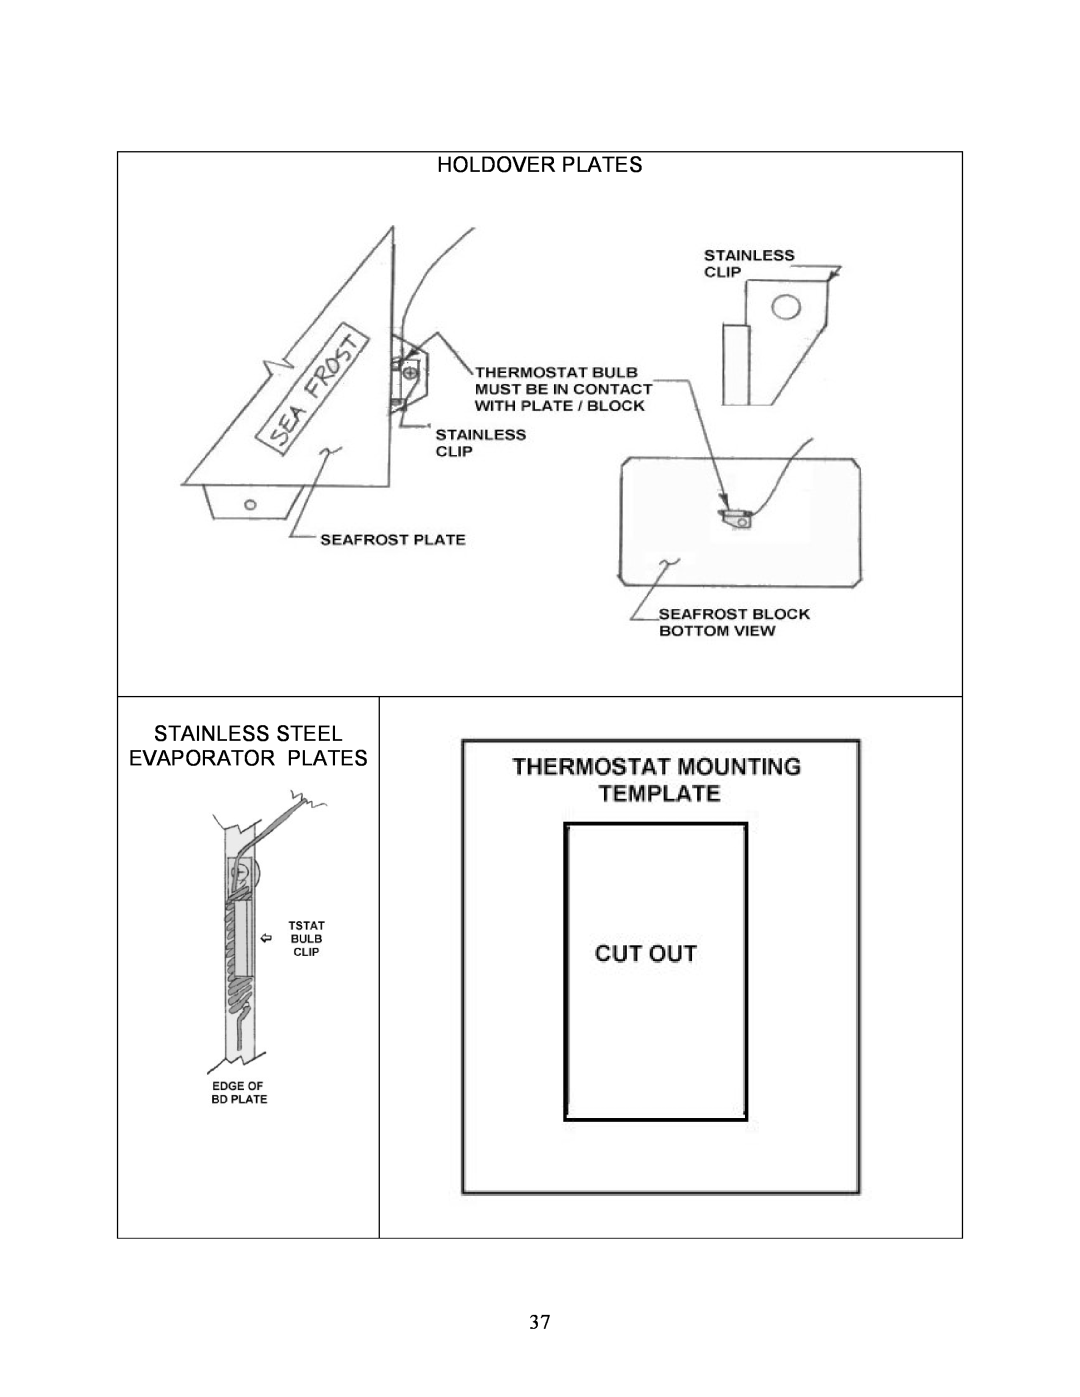 Sea Frost BG 2000 installation instructions Holdover Plates Stainless Steel Evaporator Plates 